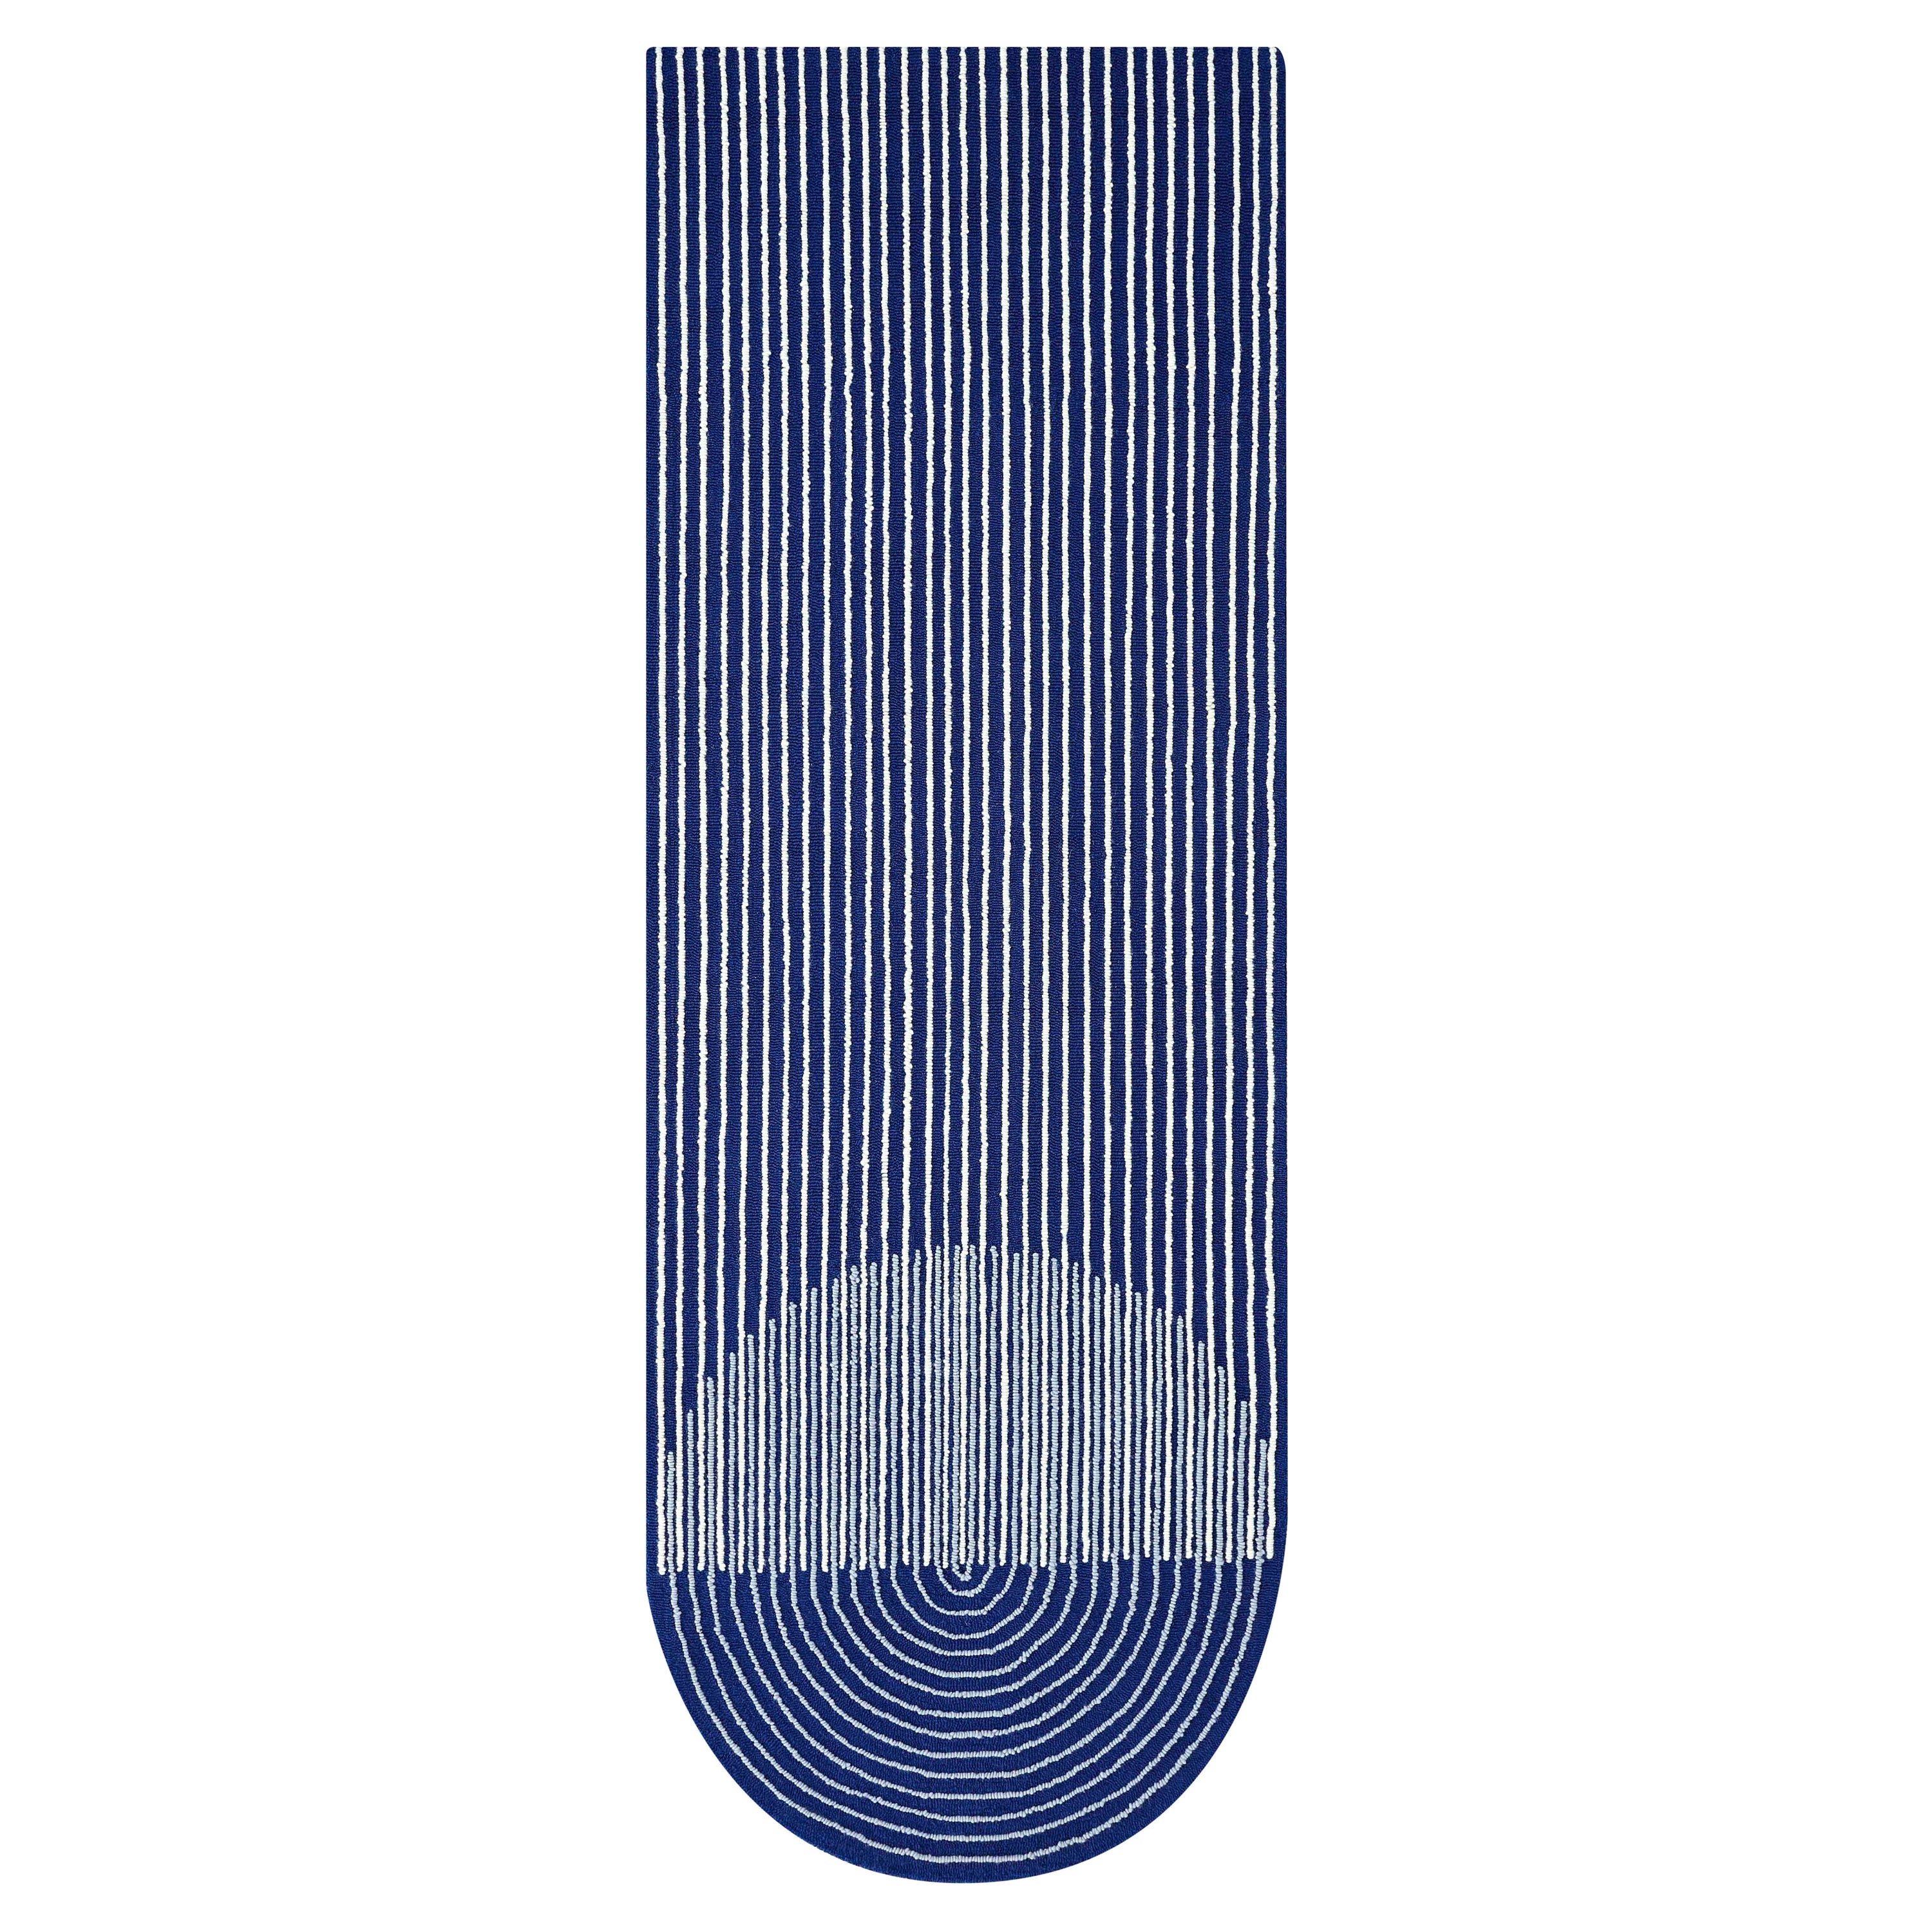 GAN Ply Small Wool Rug in Blue by MUT Design